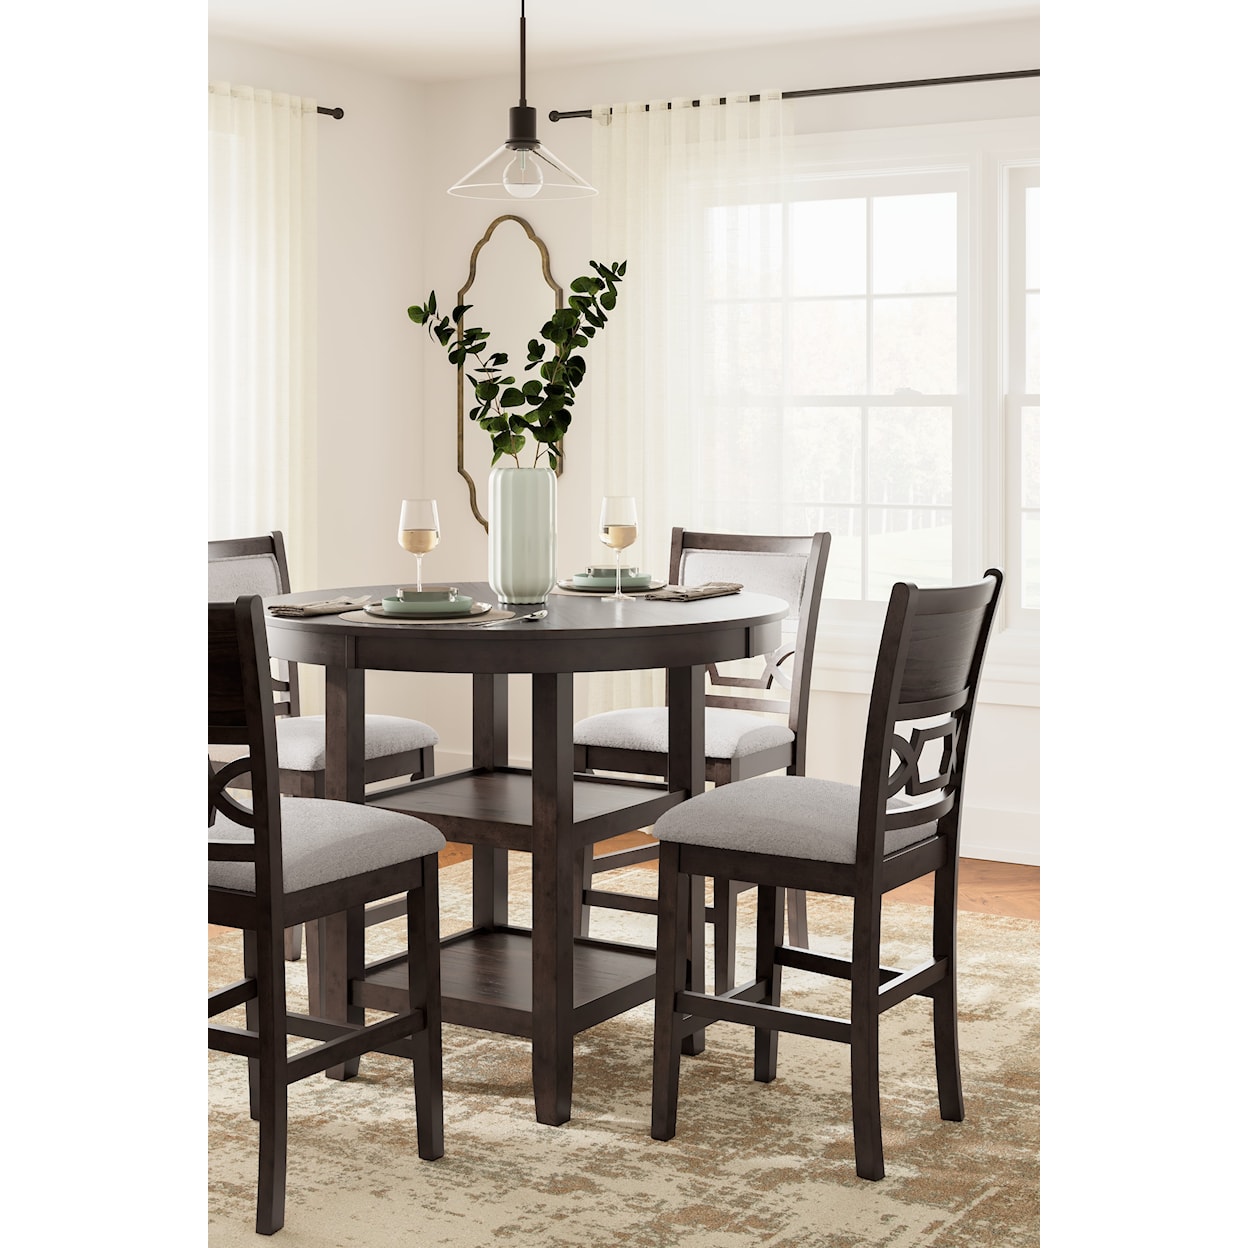 Benchcraft Langwest Counter Table Set